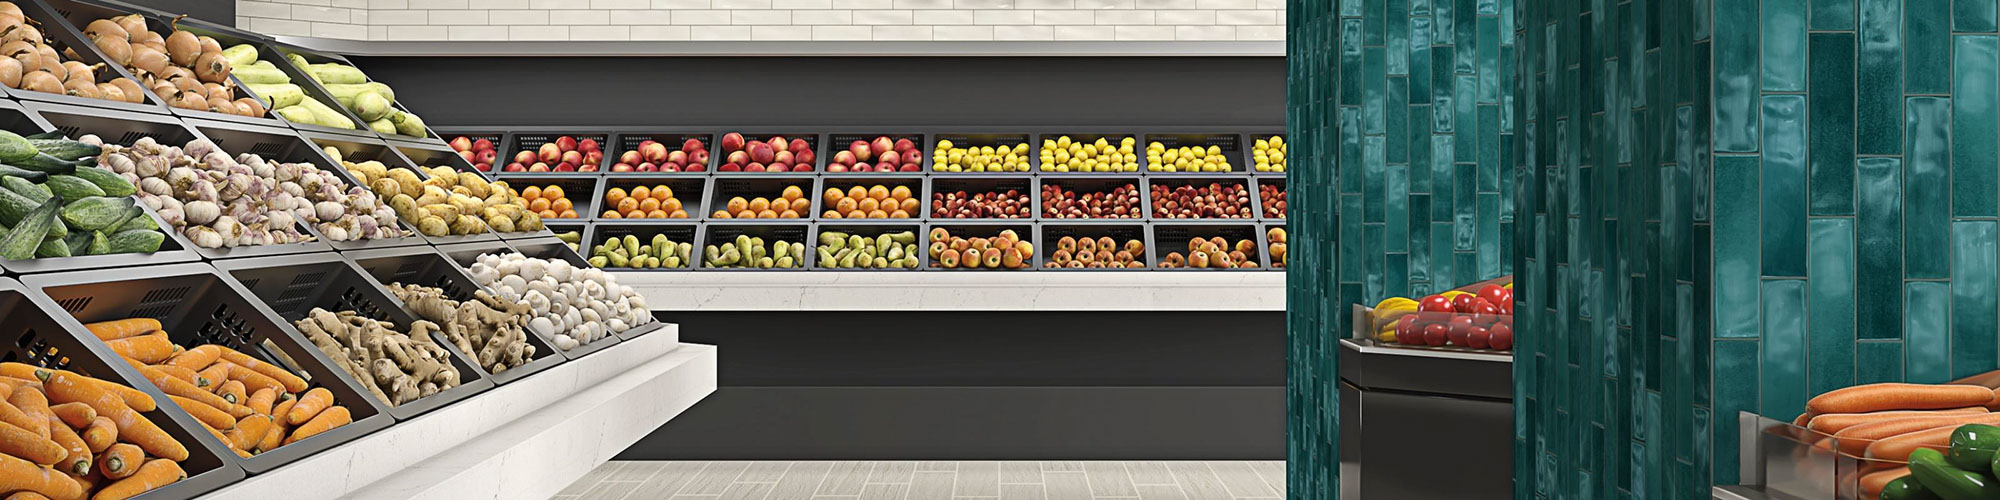 Produce section of a grocery store with floor tiling that looks like light wood planks, bright teal tile pillars, bins full of fruits & vegetables.